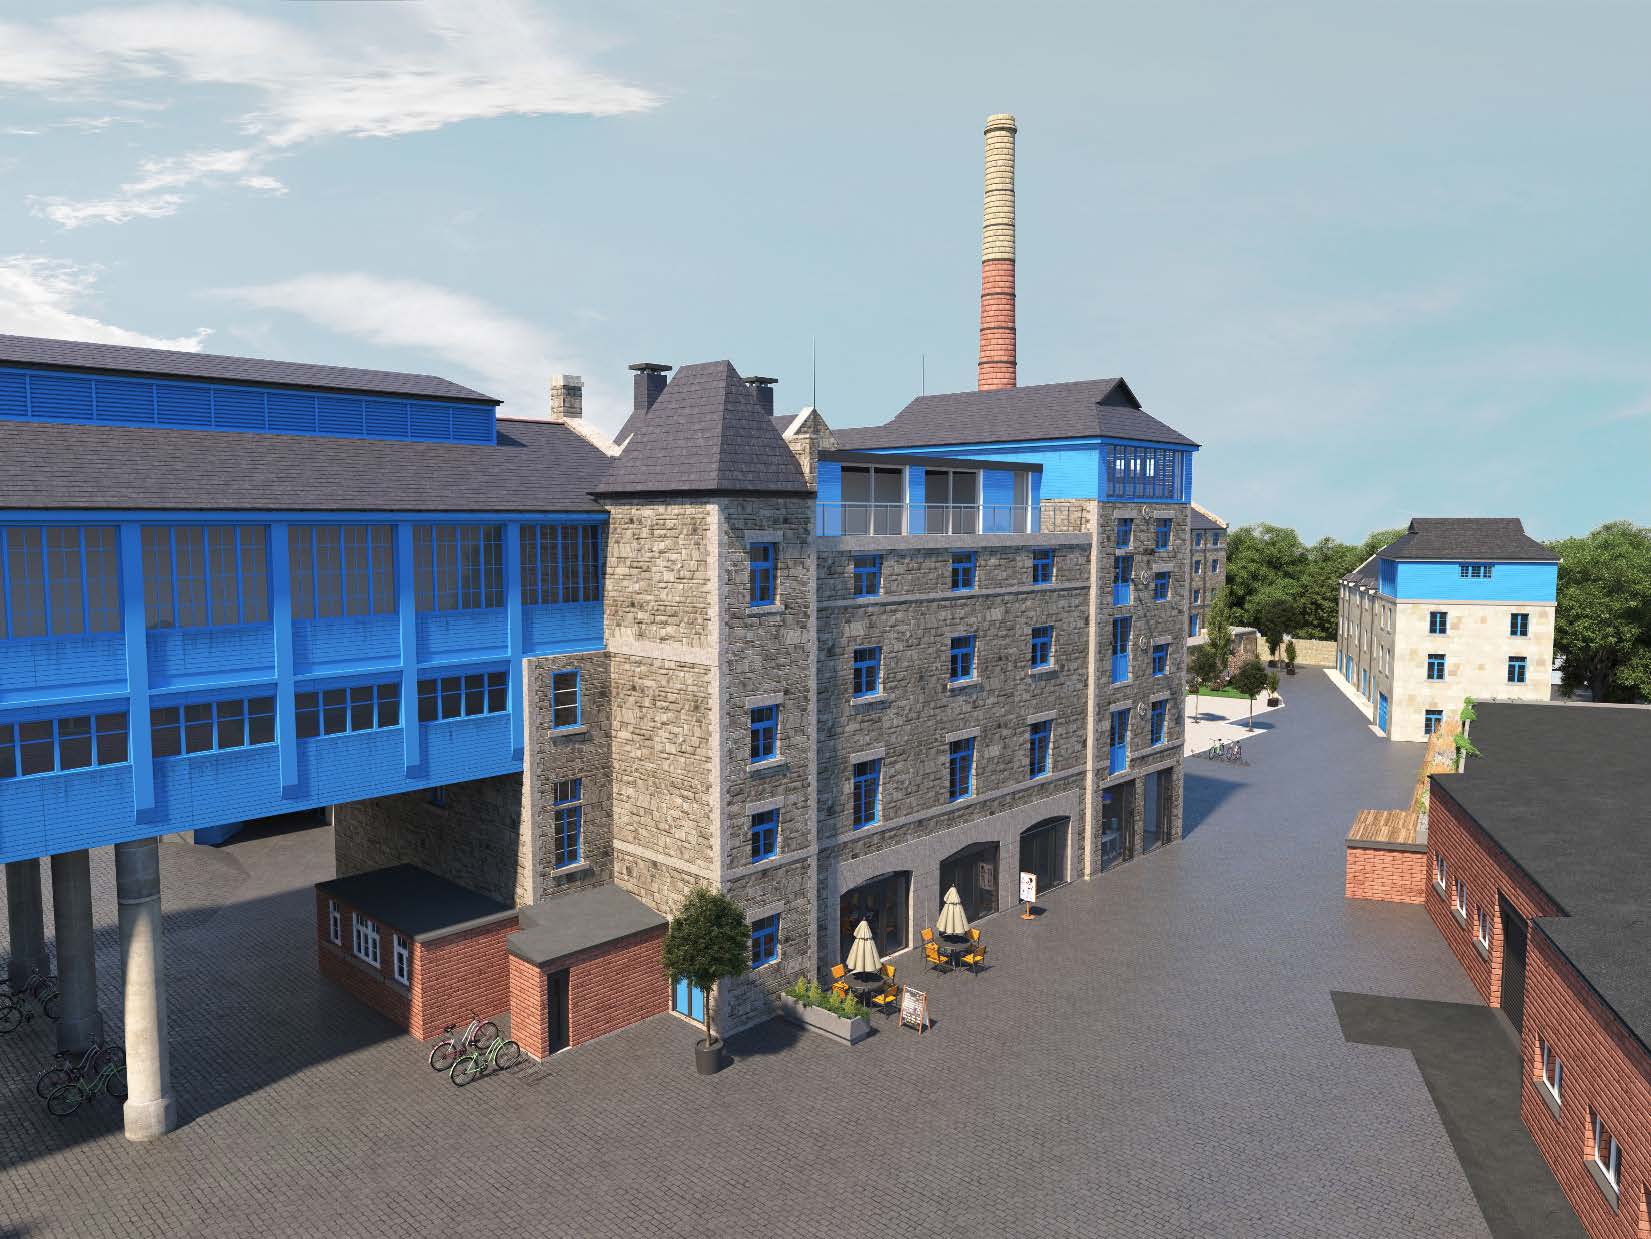 Offers invited for regeneration of former Edinburgh brewery site